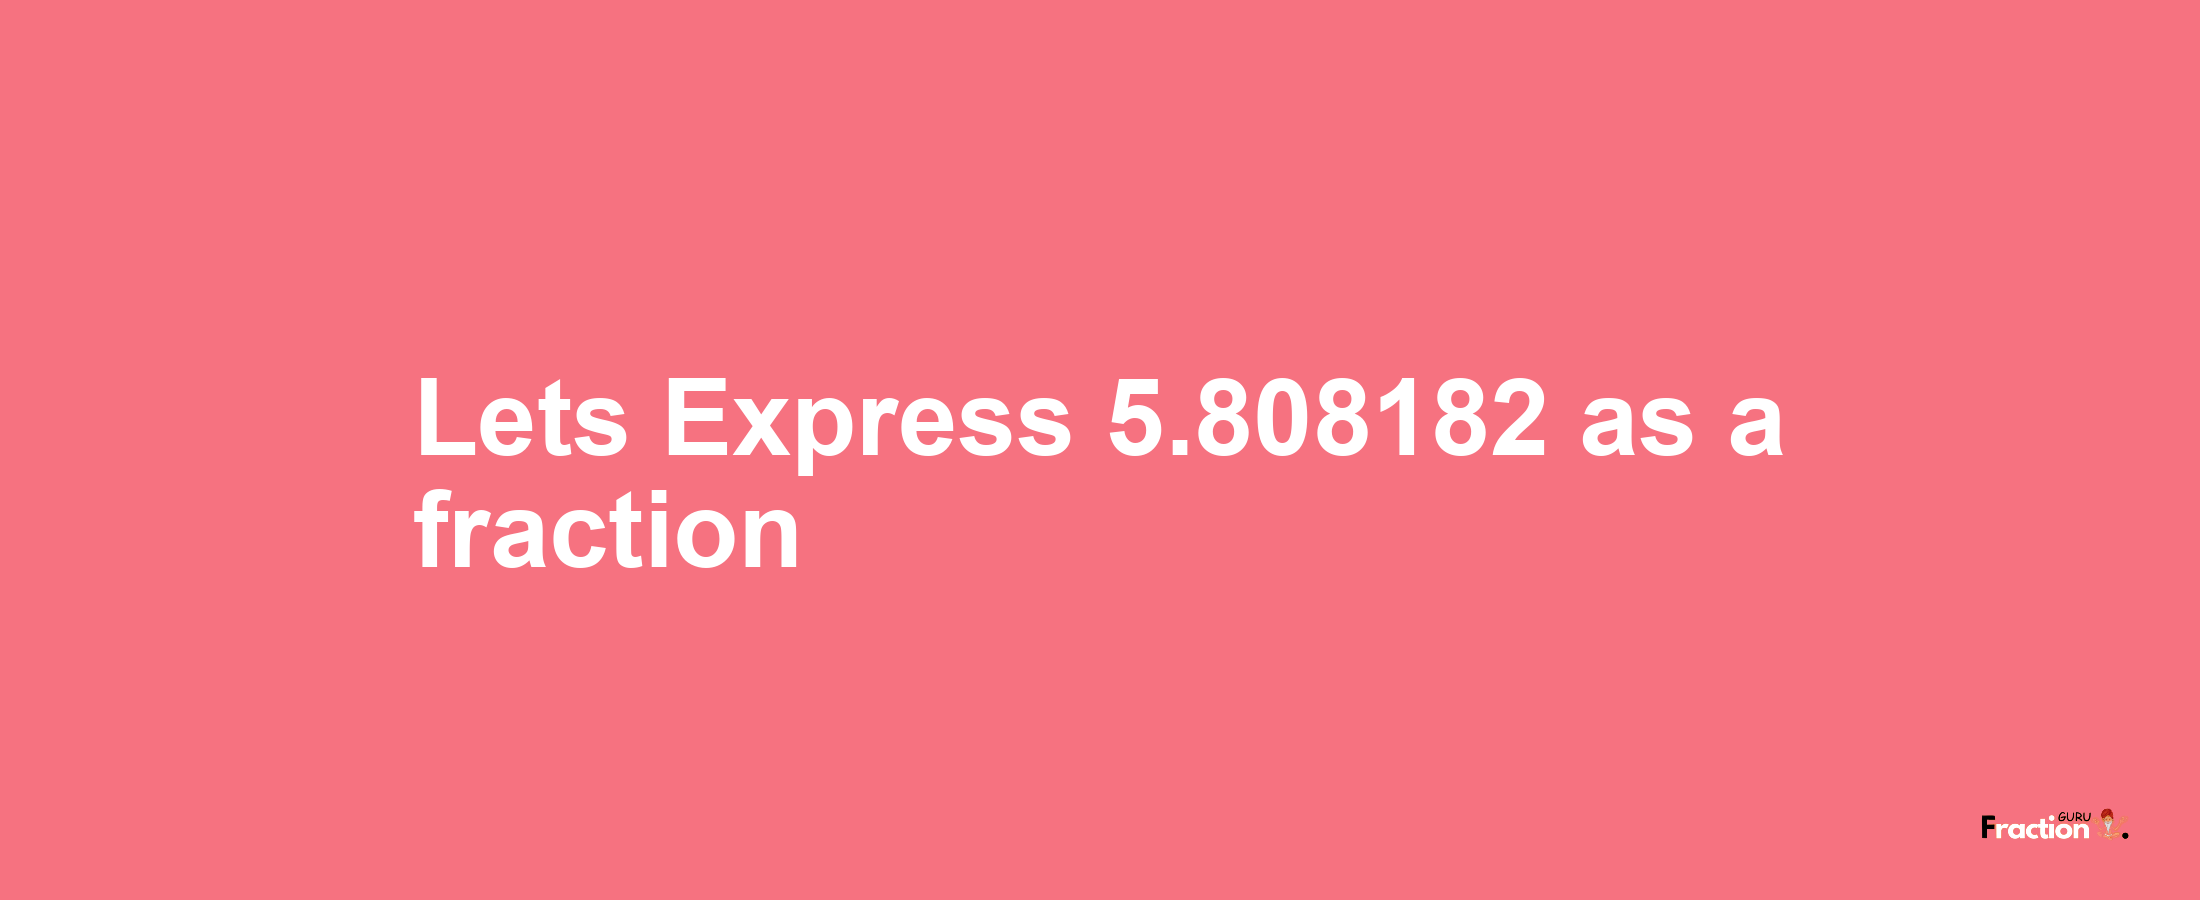 Lets Express 5.808182 as afraction